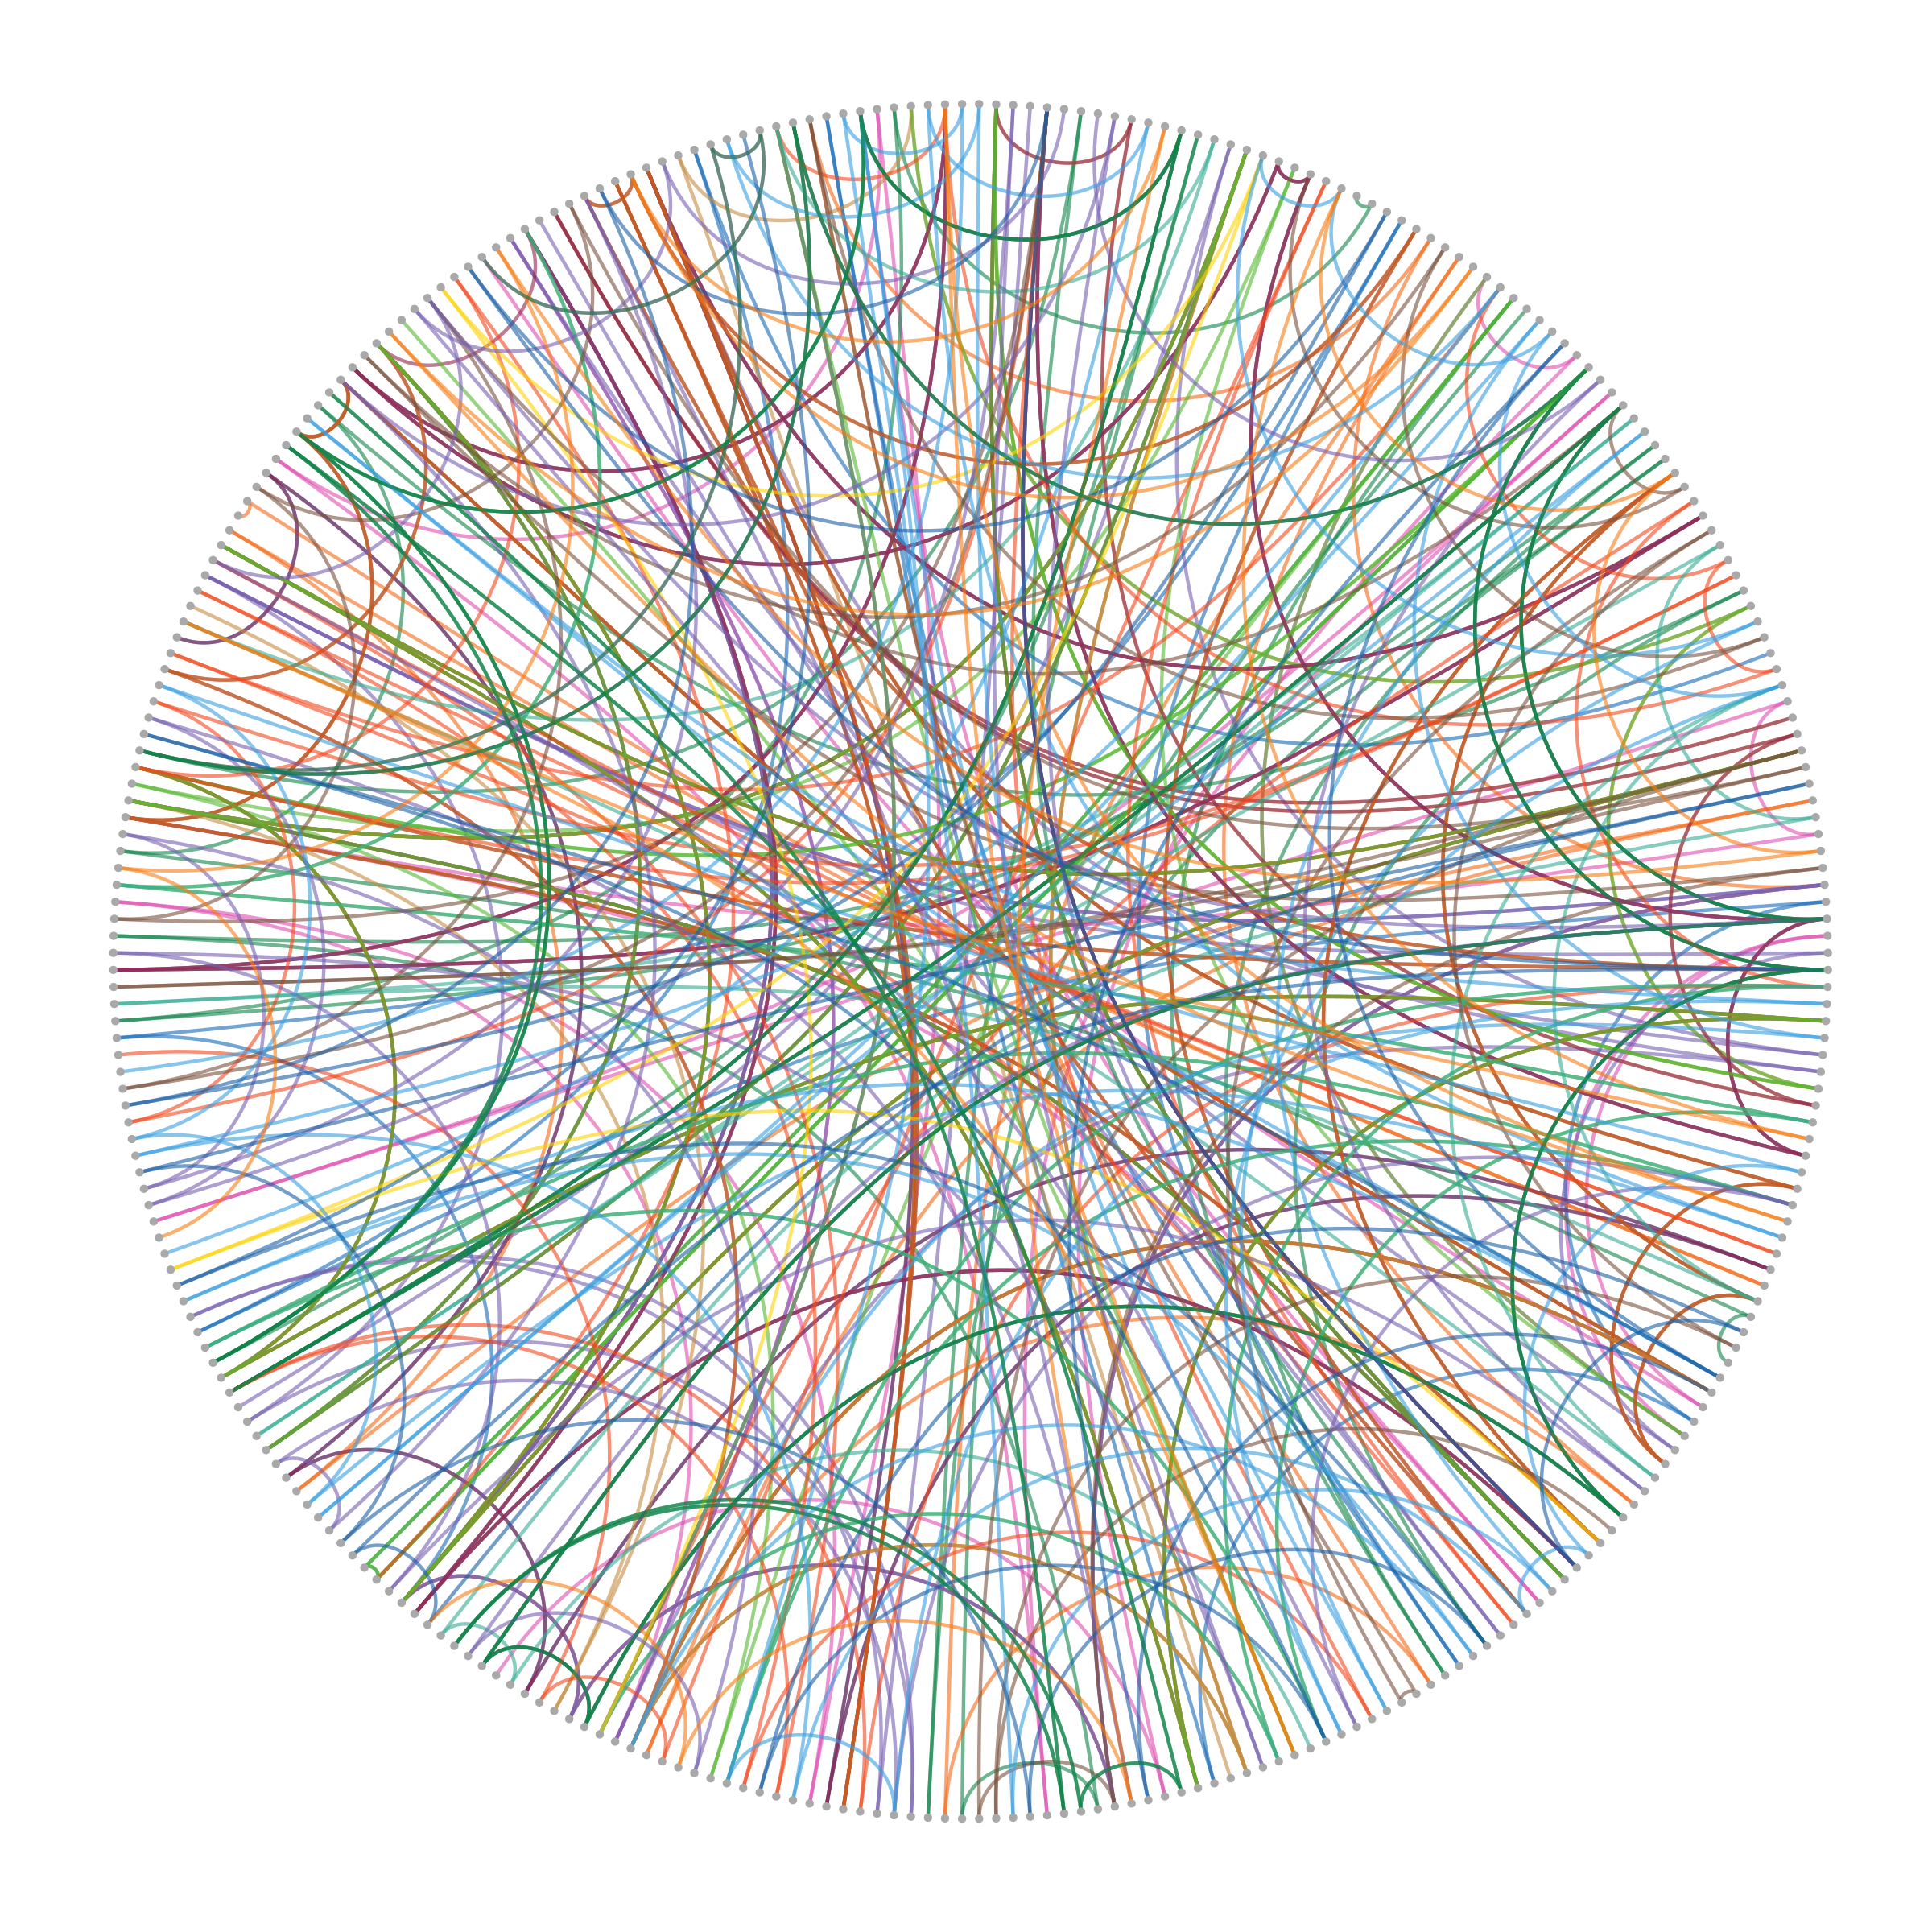 Berlin traffic network graph visualisation with alphabetical node order